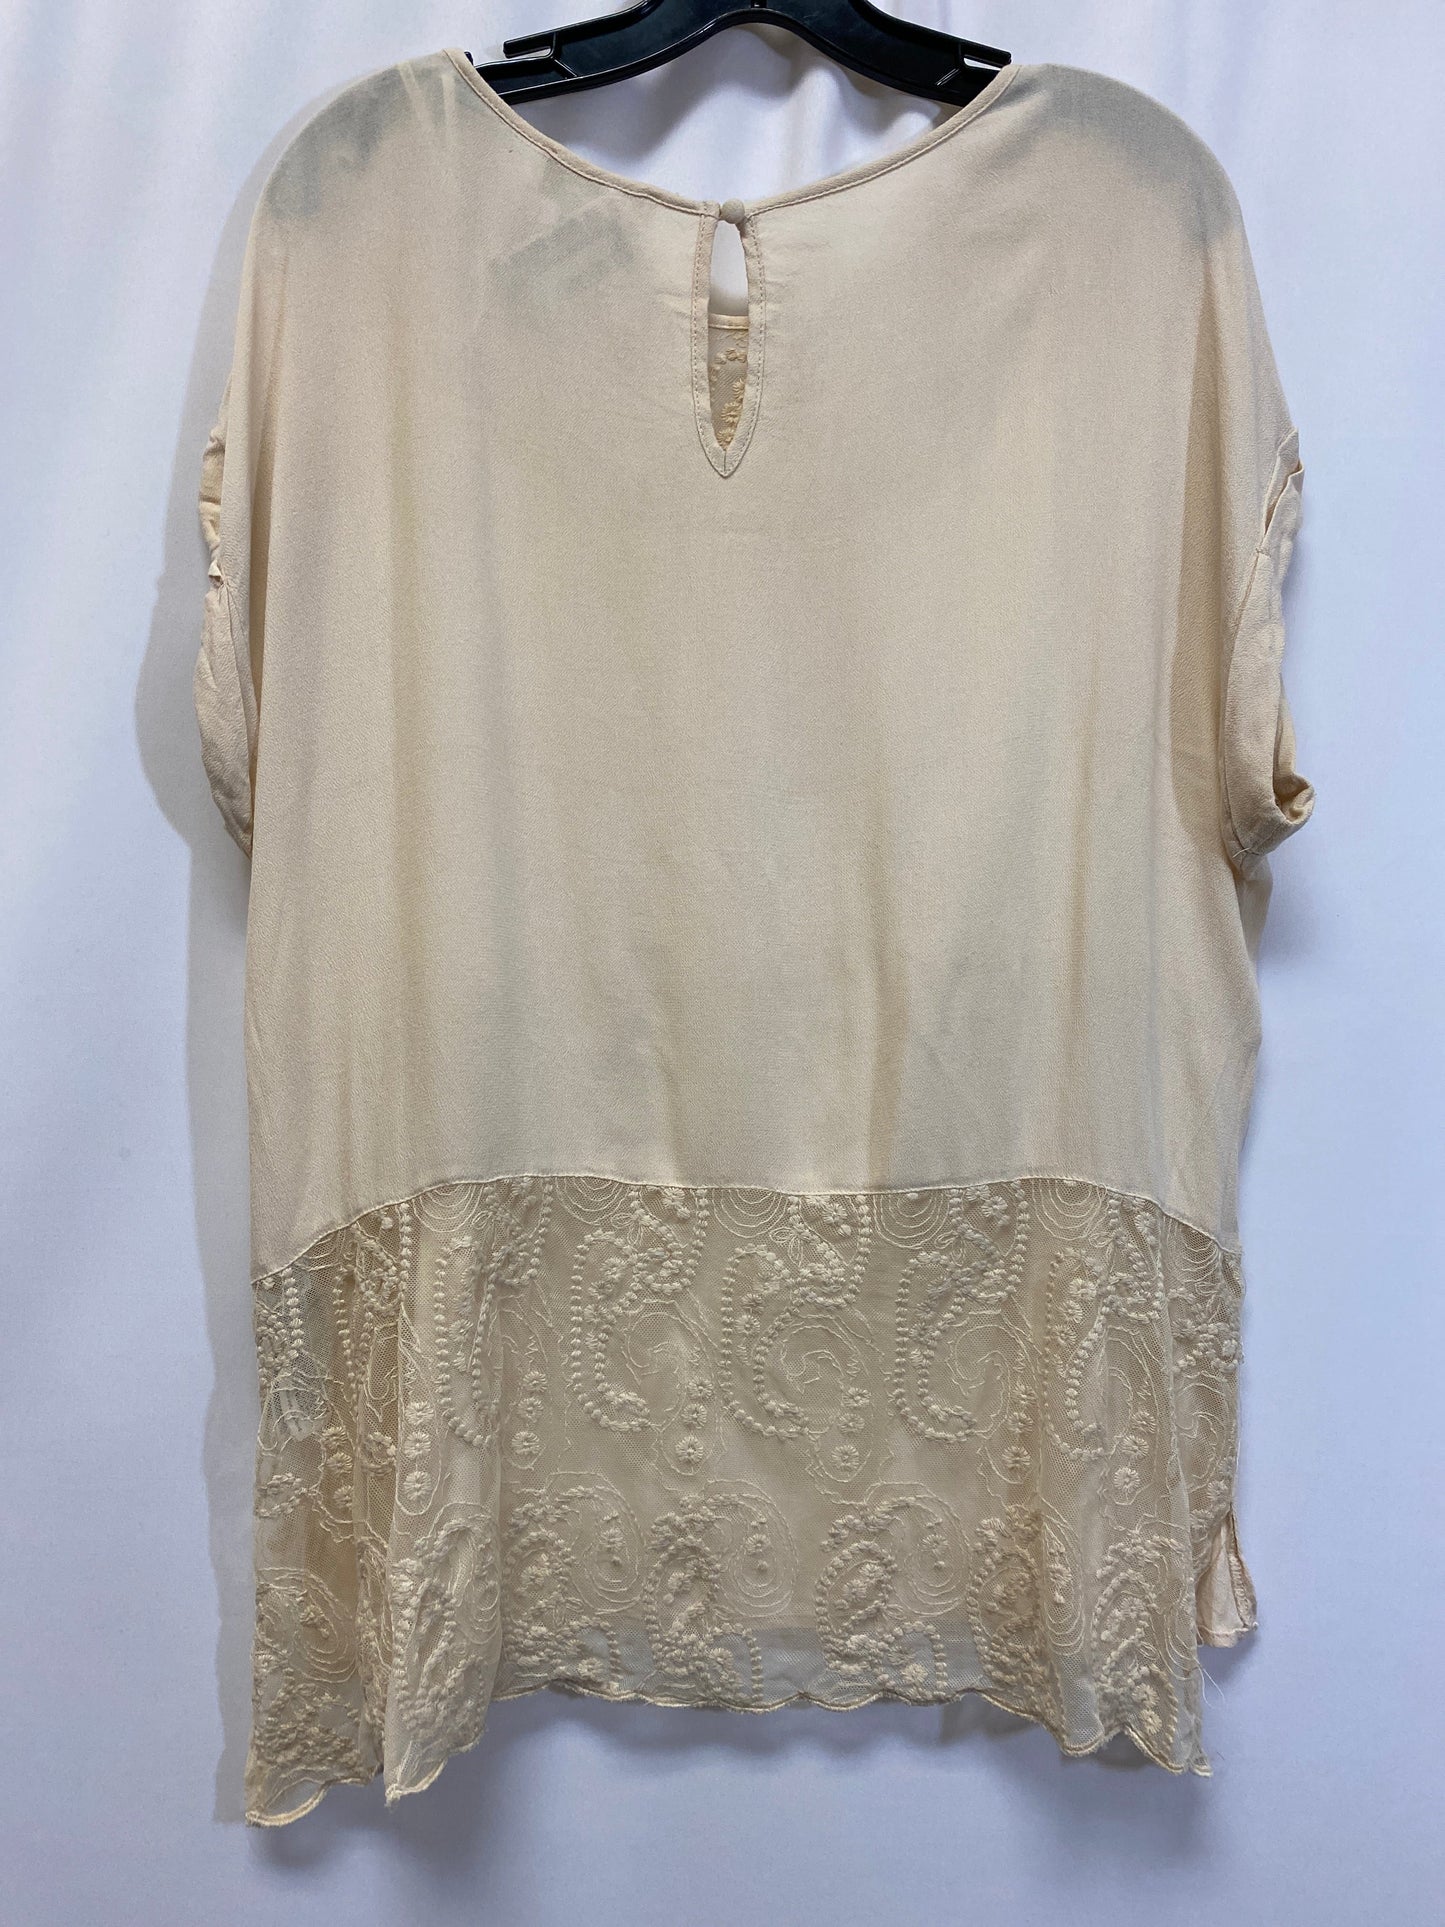 Beige Top Short Sleeve Forever 21, Size Xl